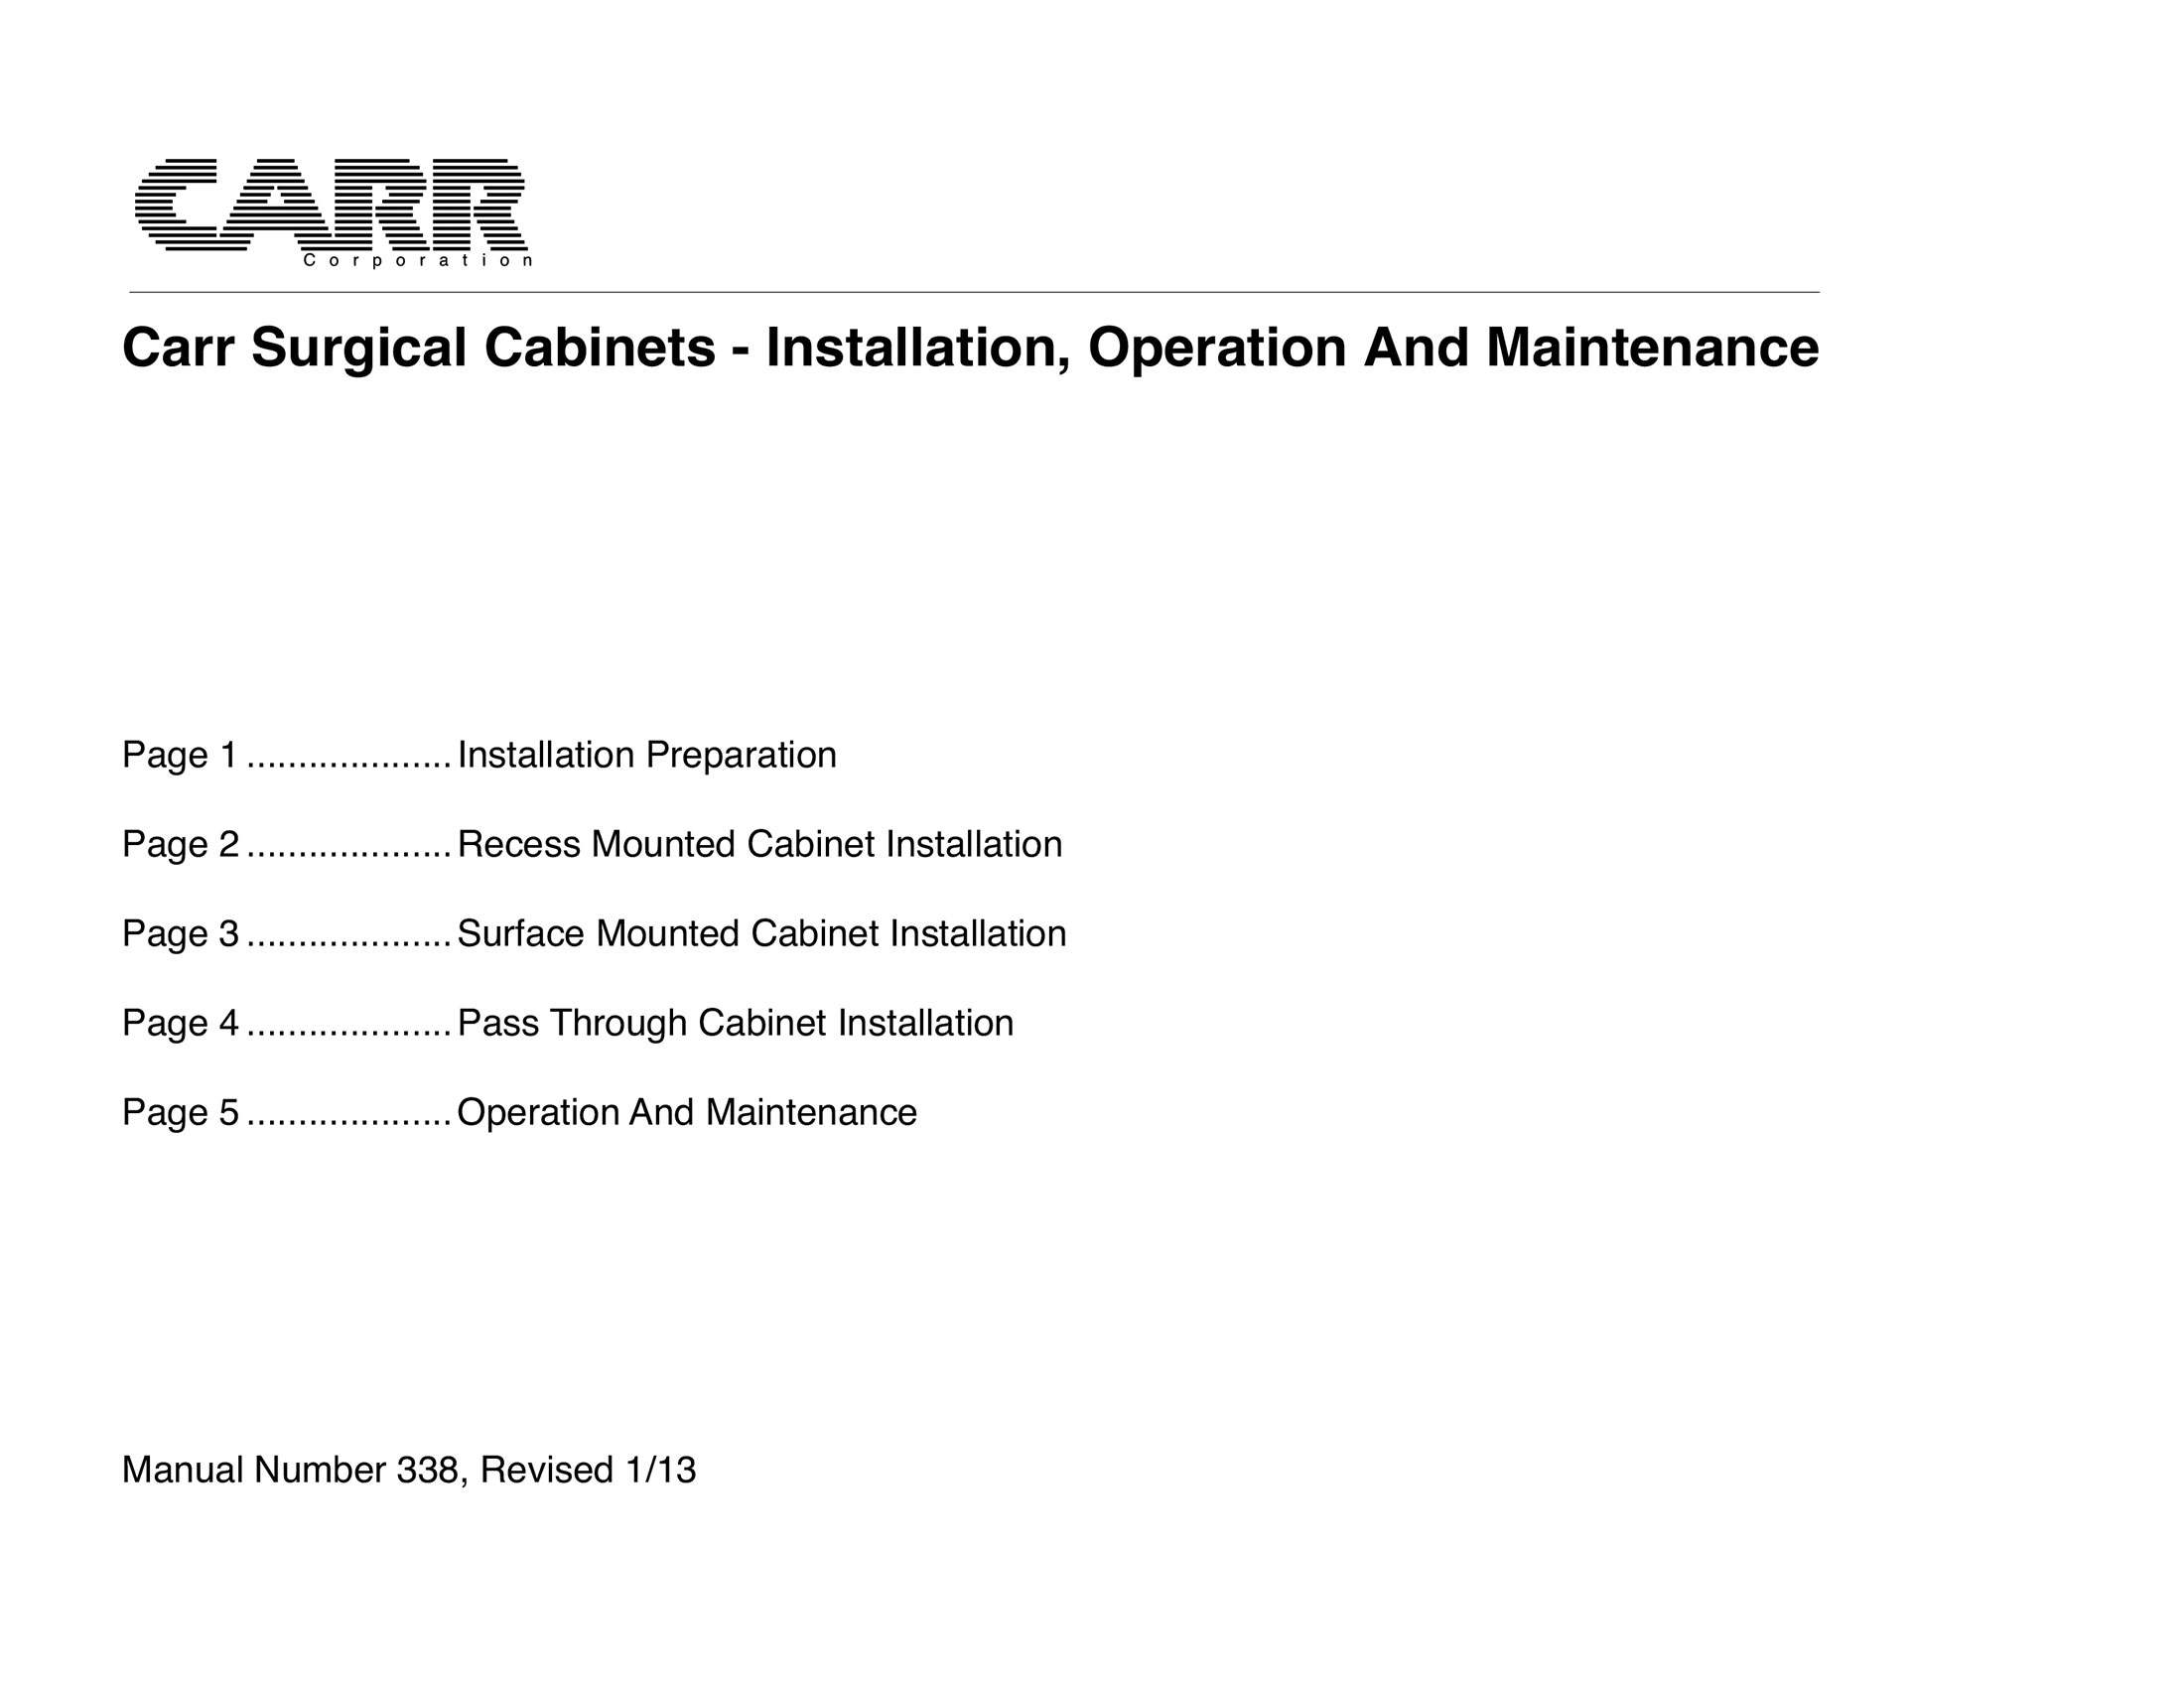 STC: SURGICAL TABLE ACCESSORY CABINETS